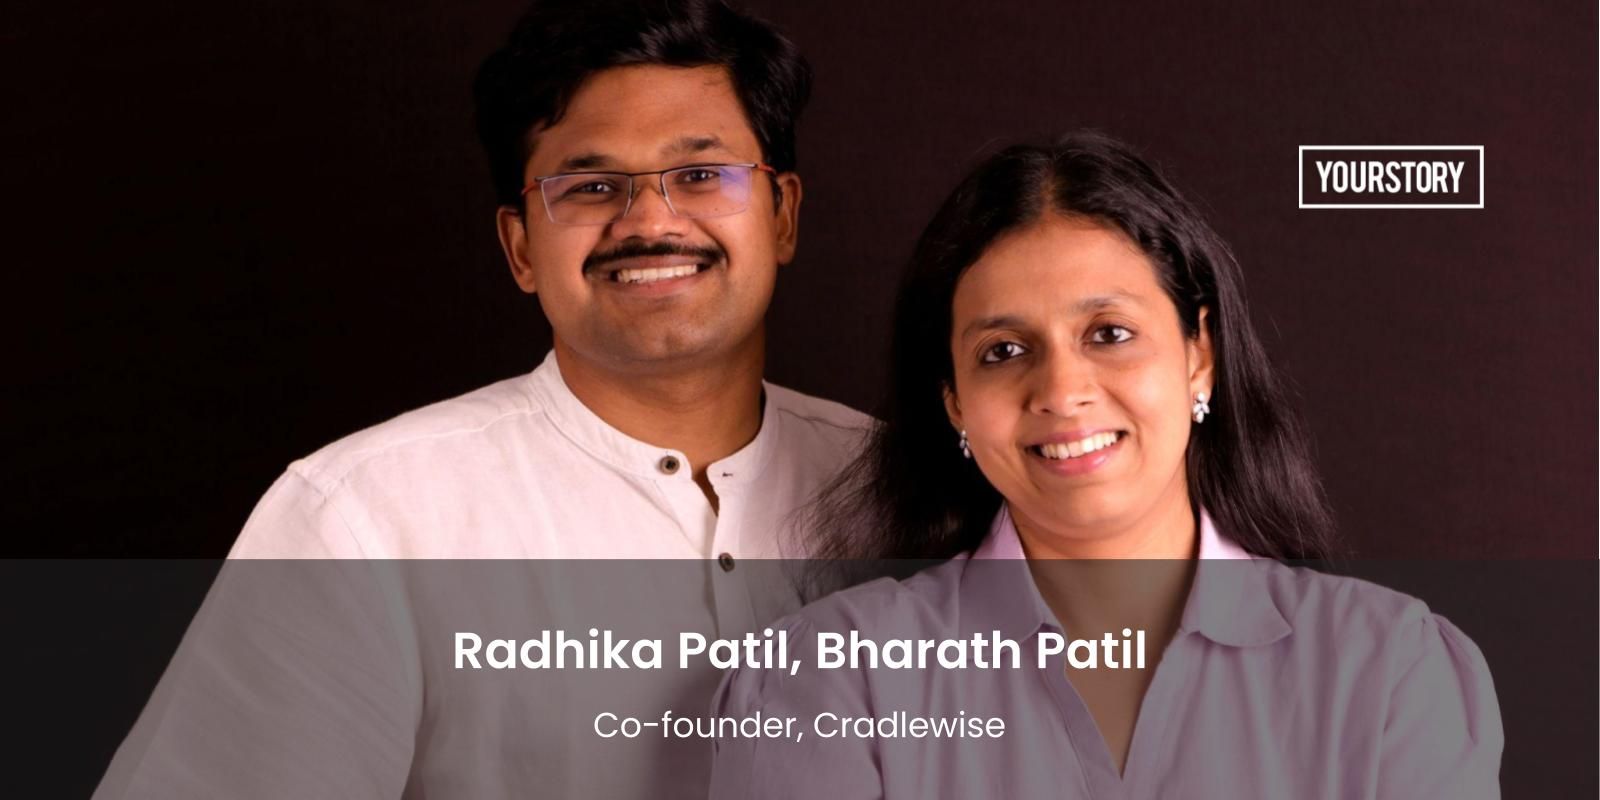 [Funding alert] Tech30 baby-tech startup Cradlewise raises $7M seed round led by Footwork, others